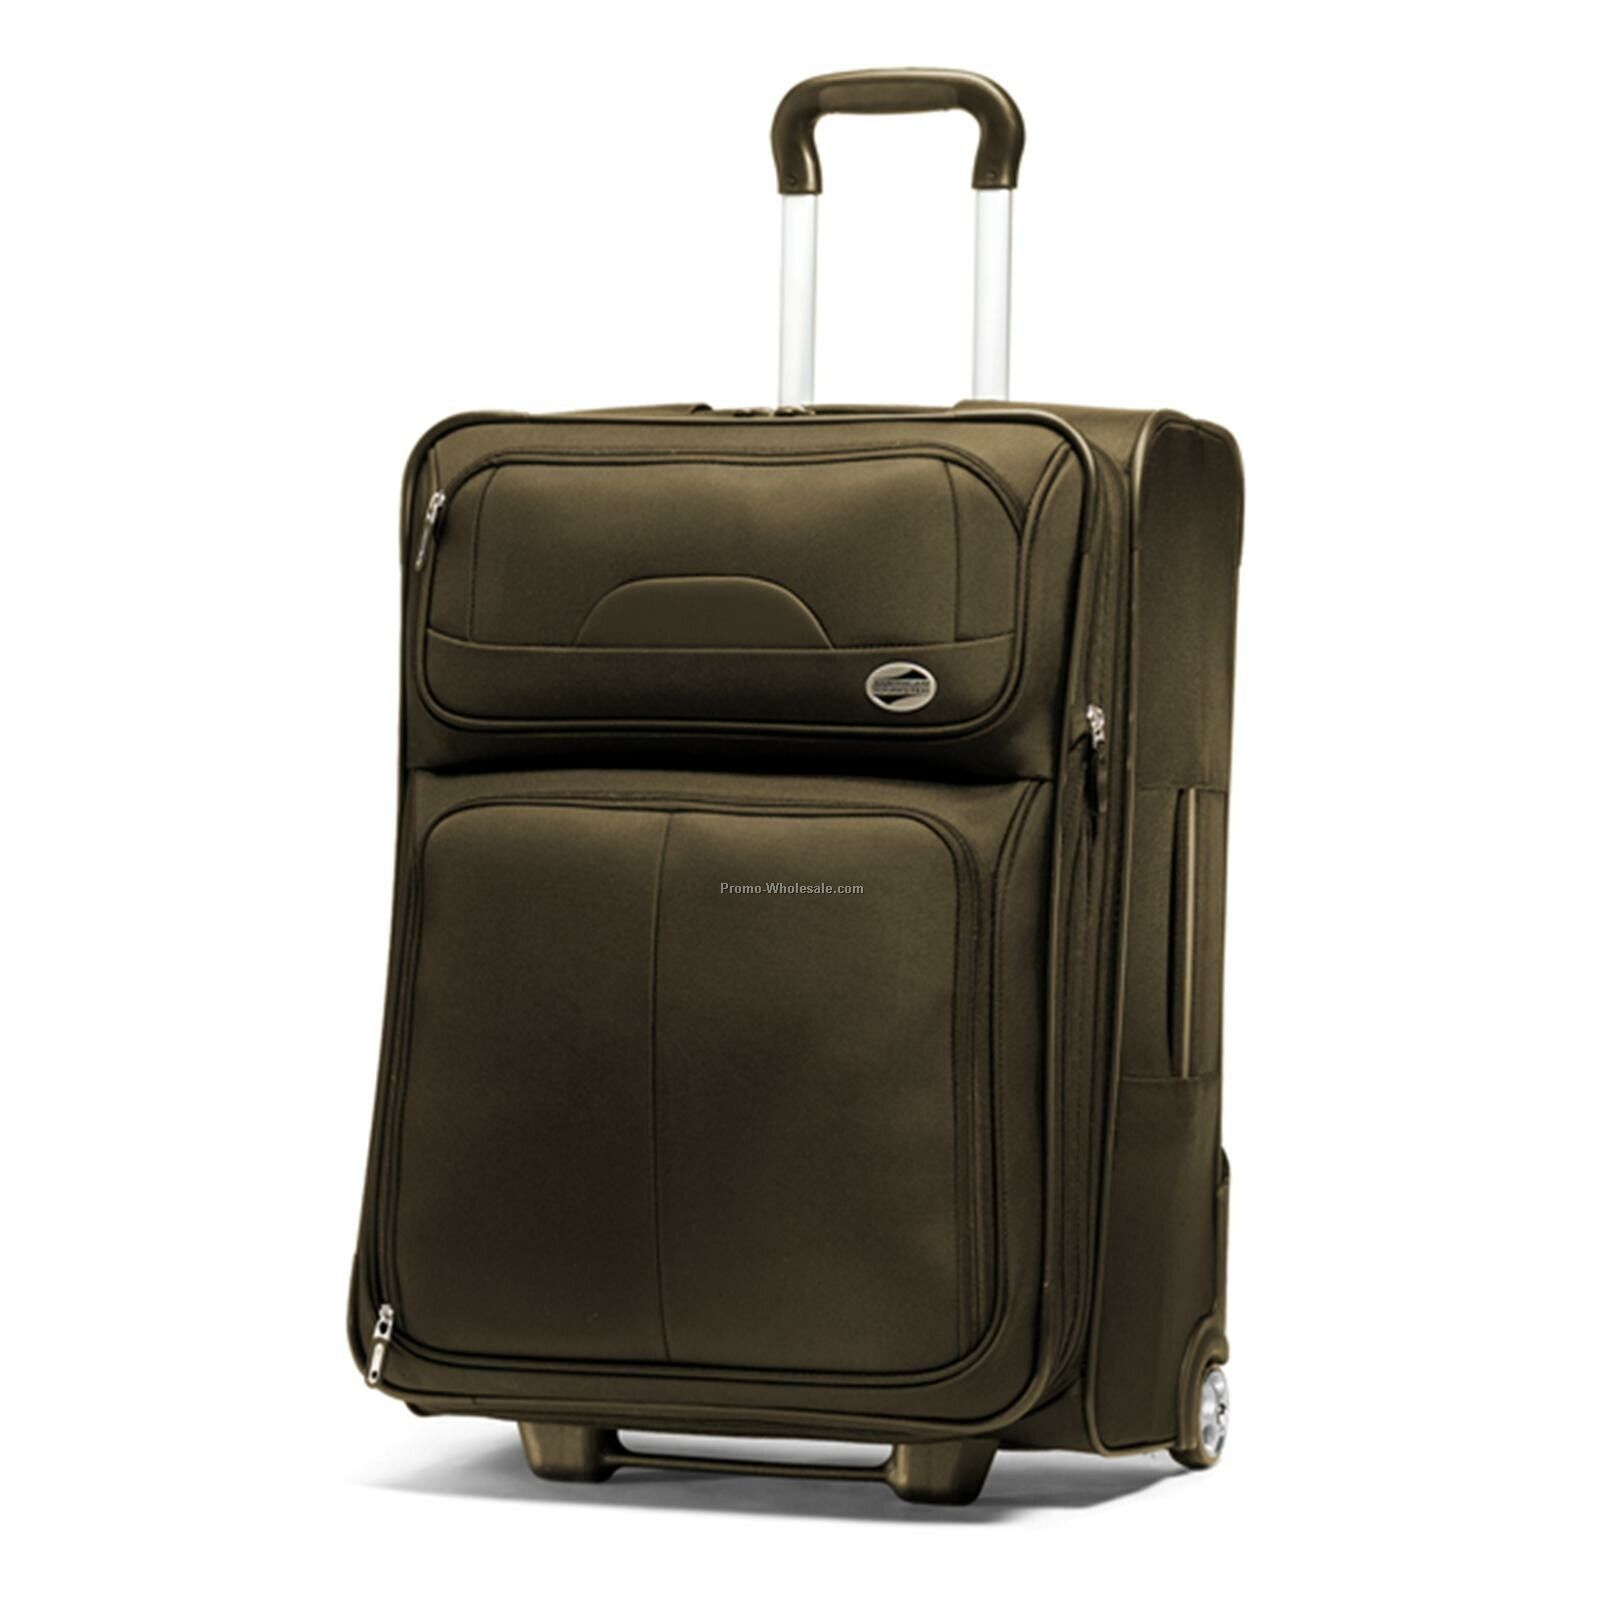 American Tourister Tribute 25" Upright Luggage